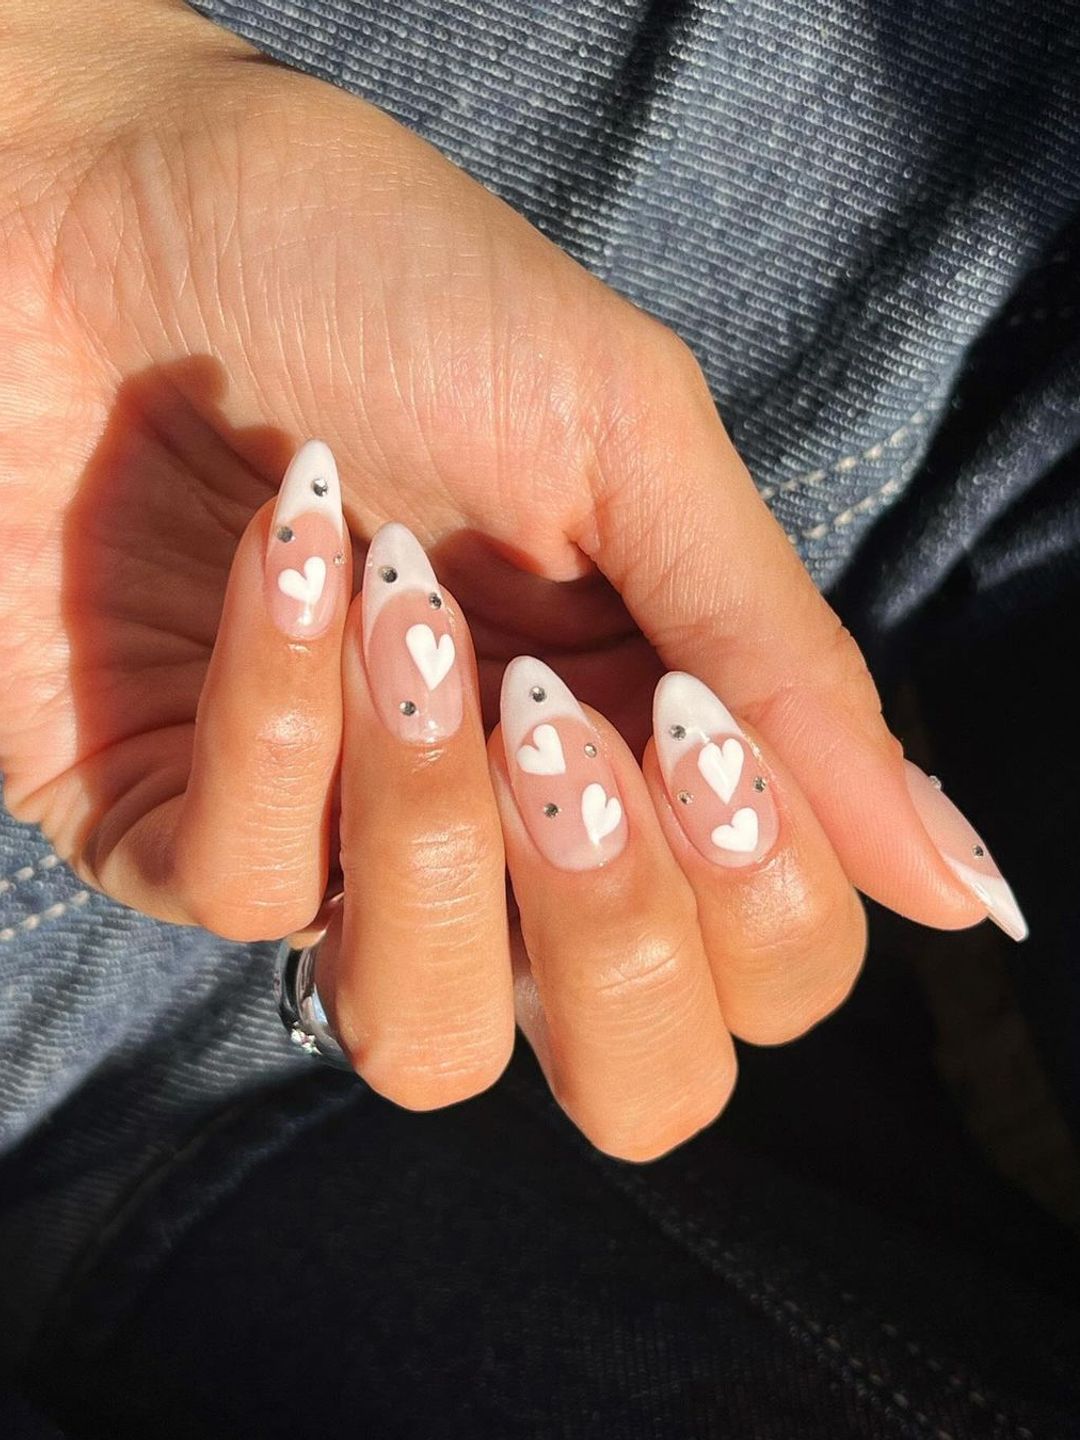 White tip nails with white hearts 